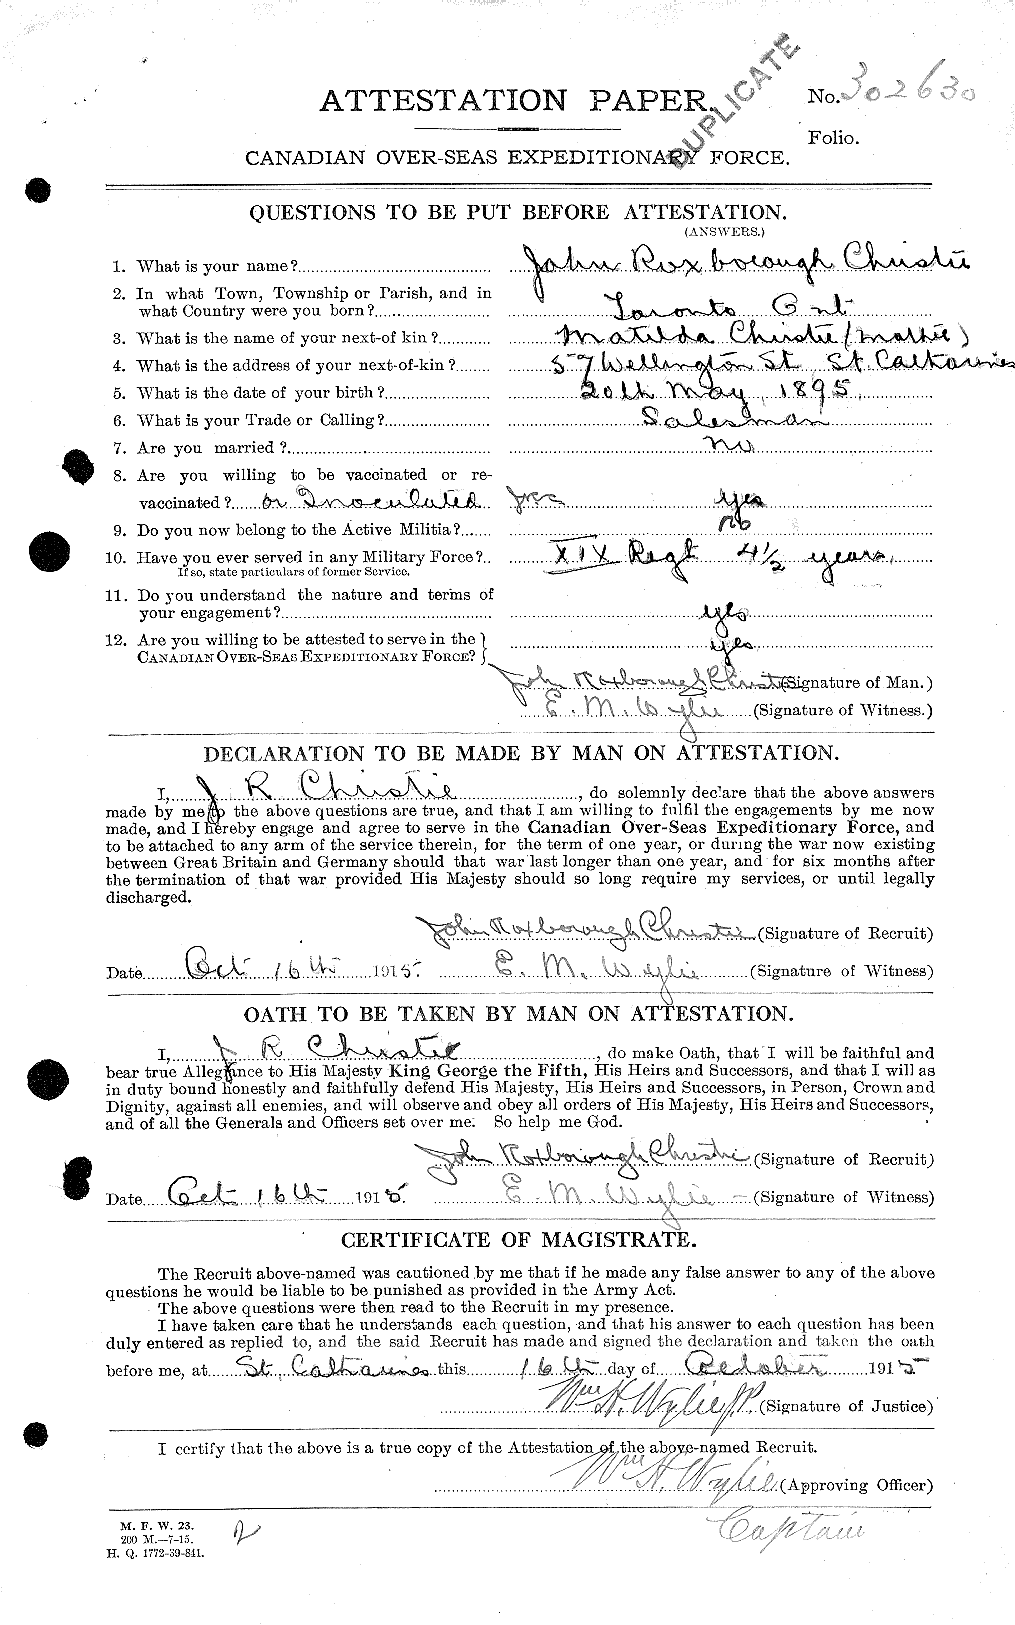 Personnel Records of the First World War - CEF 022012a